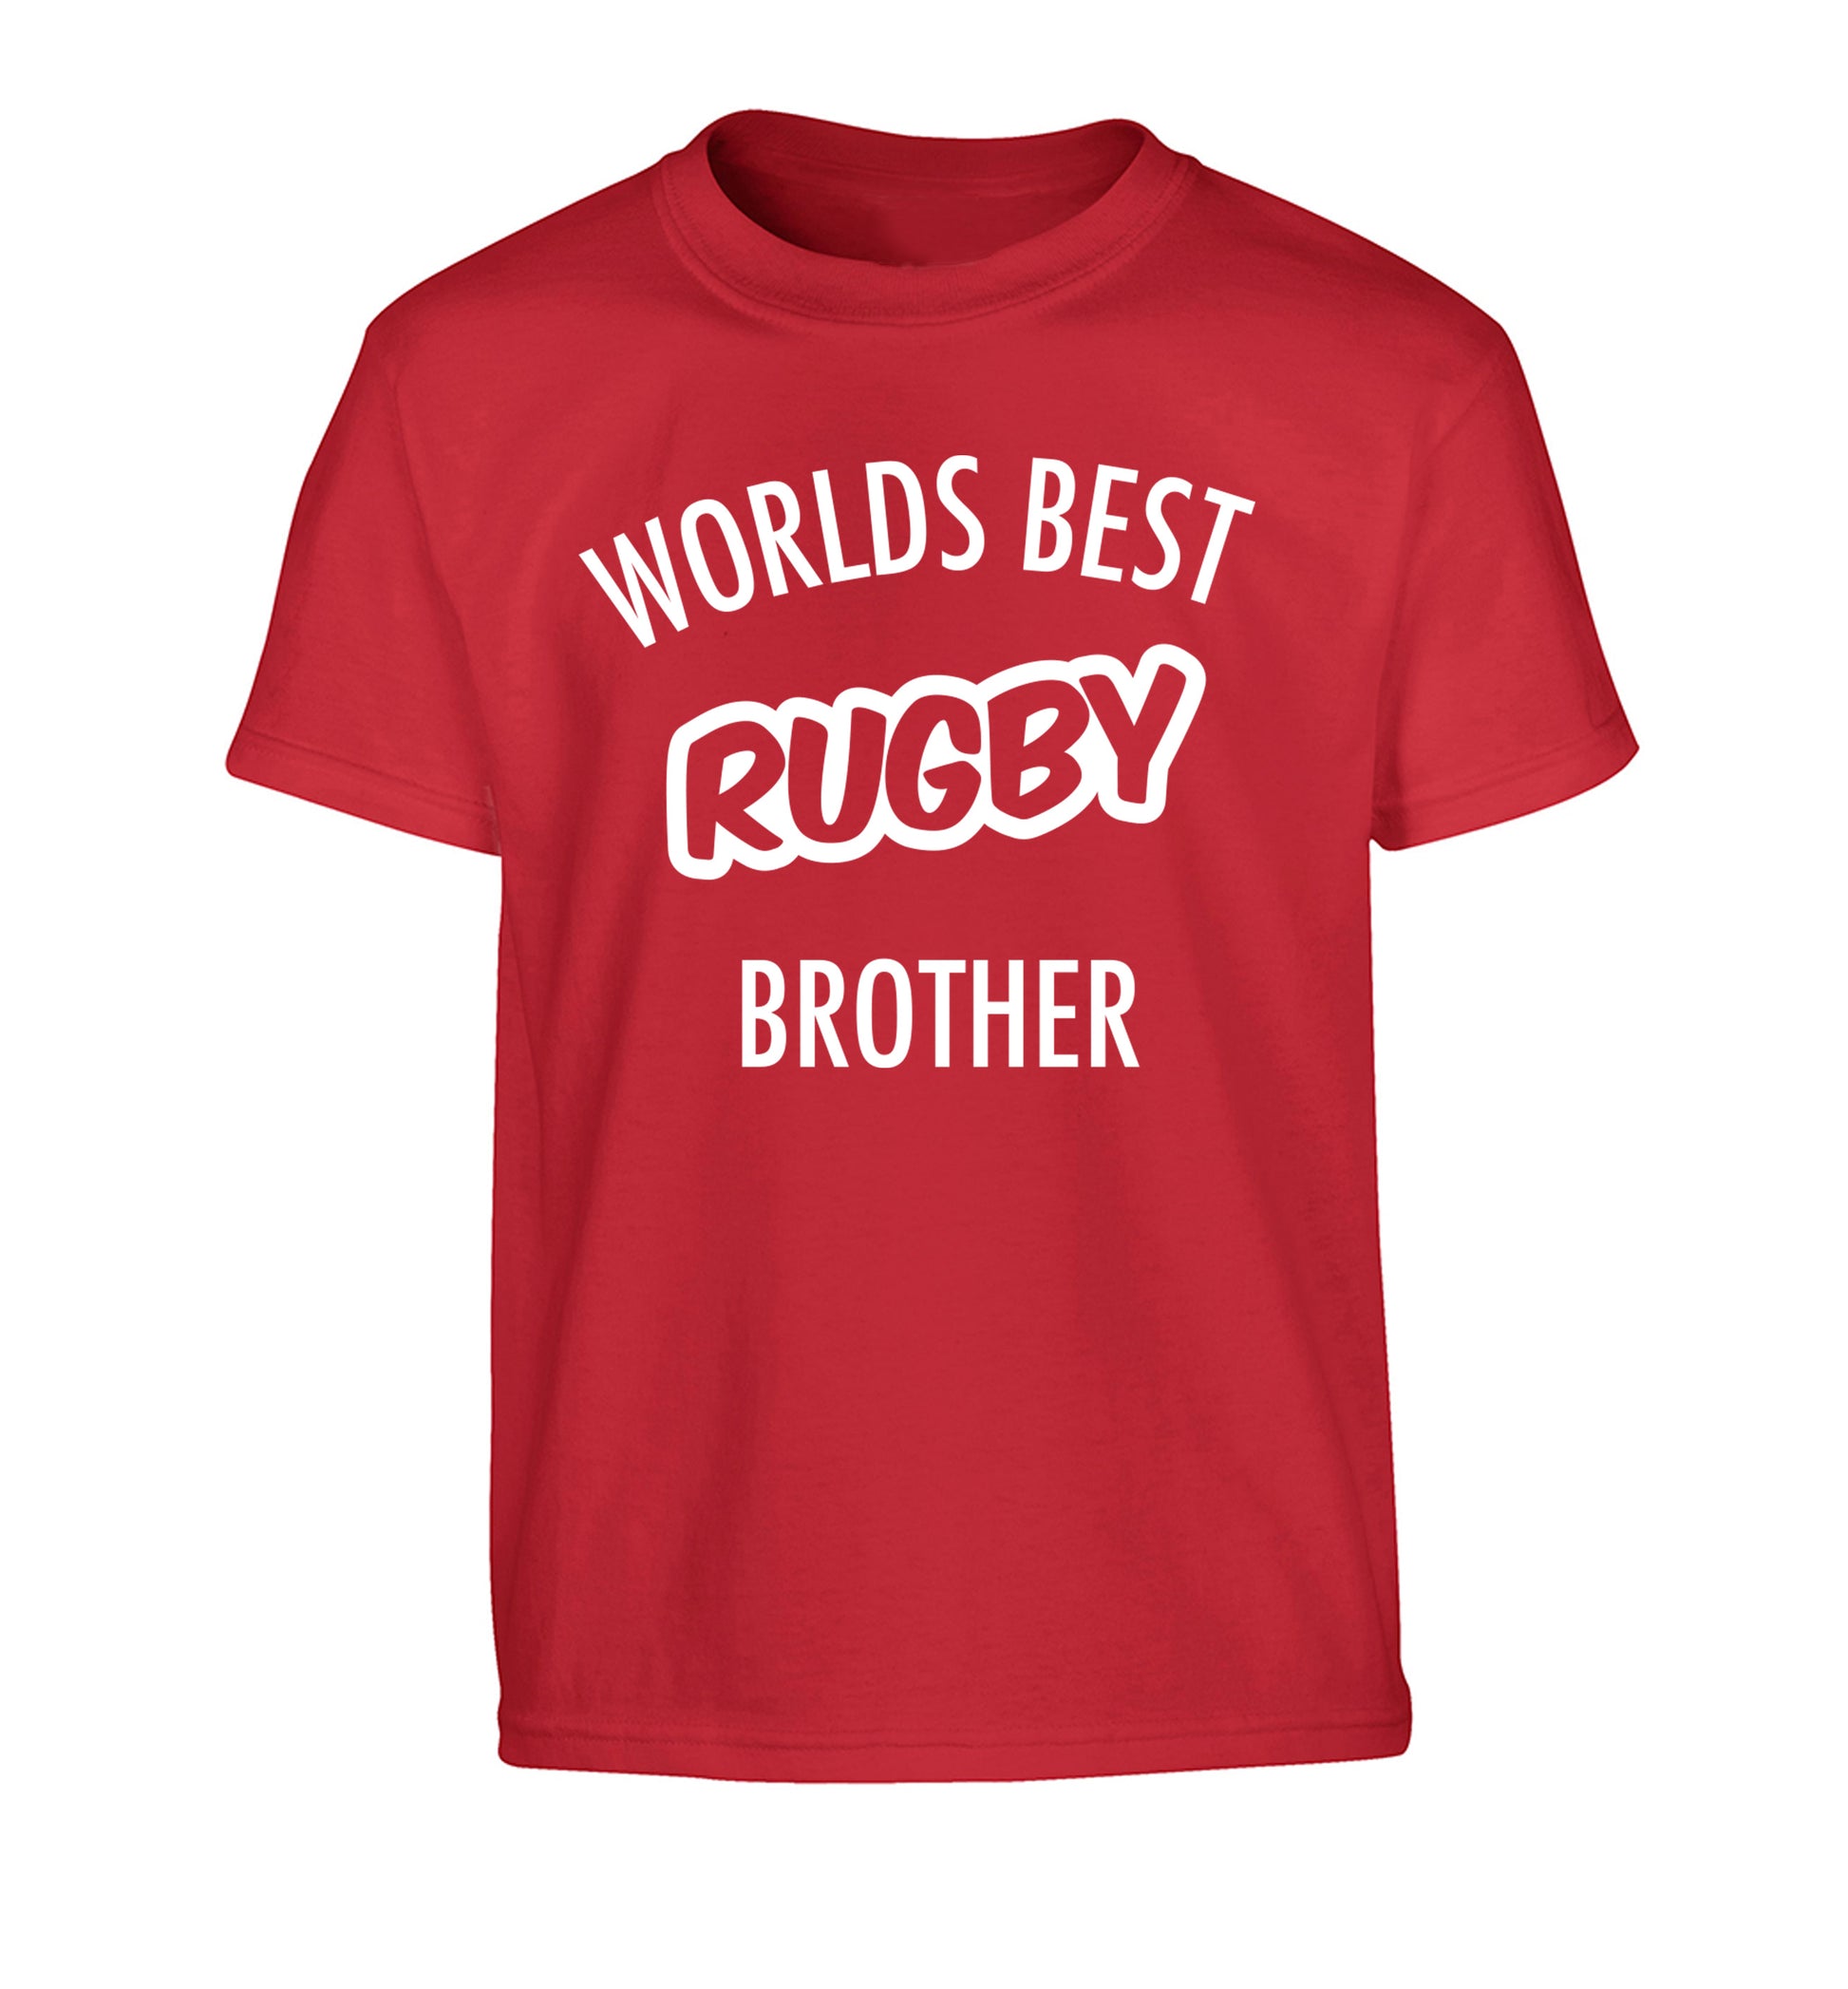 Worlds best rugby brother Children's red Tshirt 12-13 Years